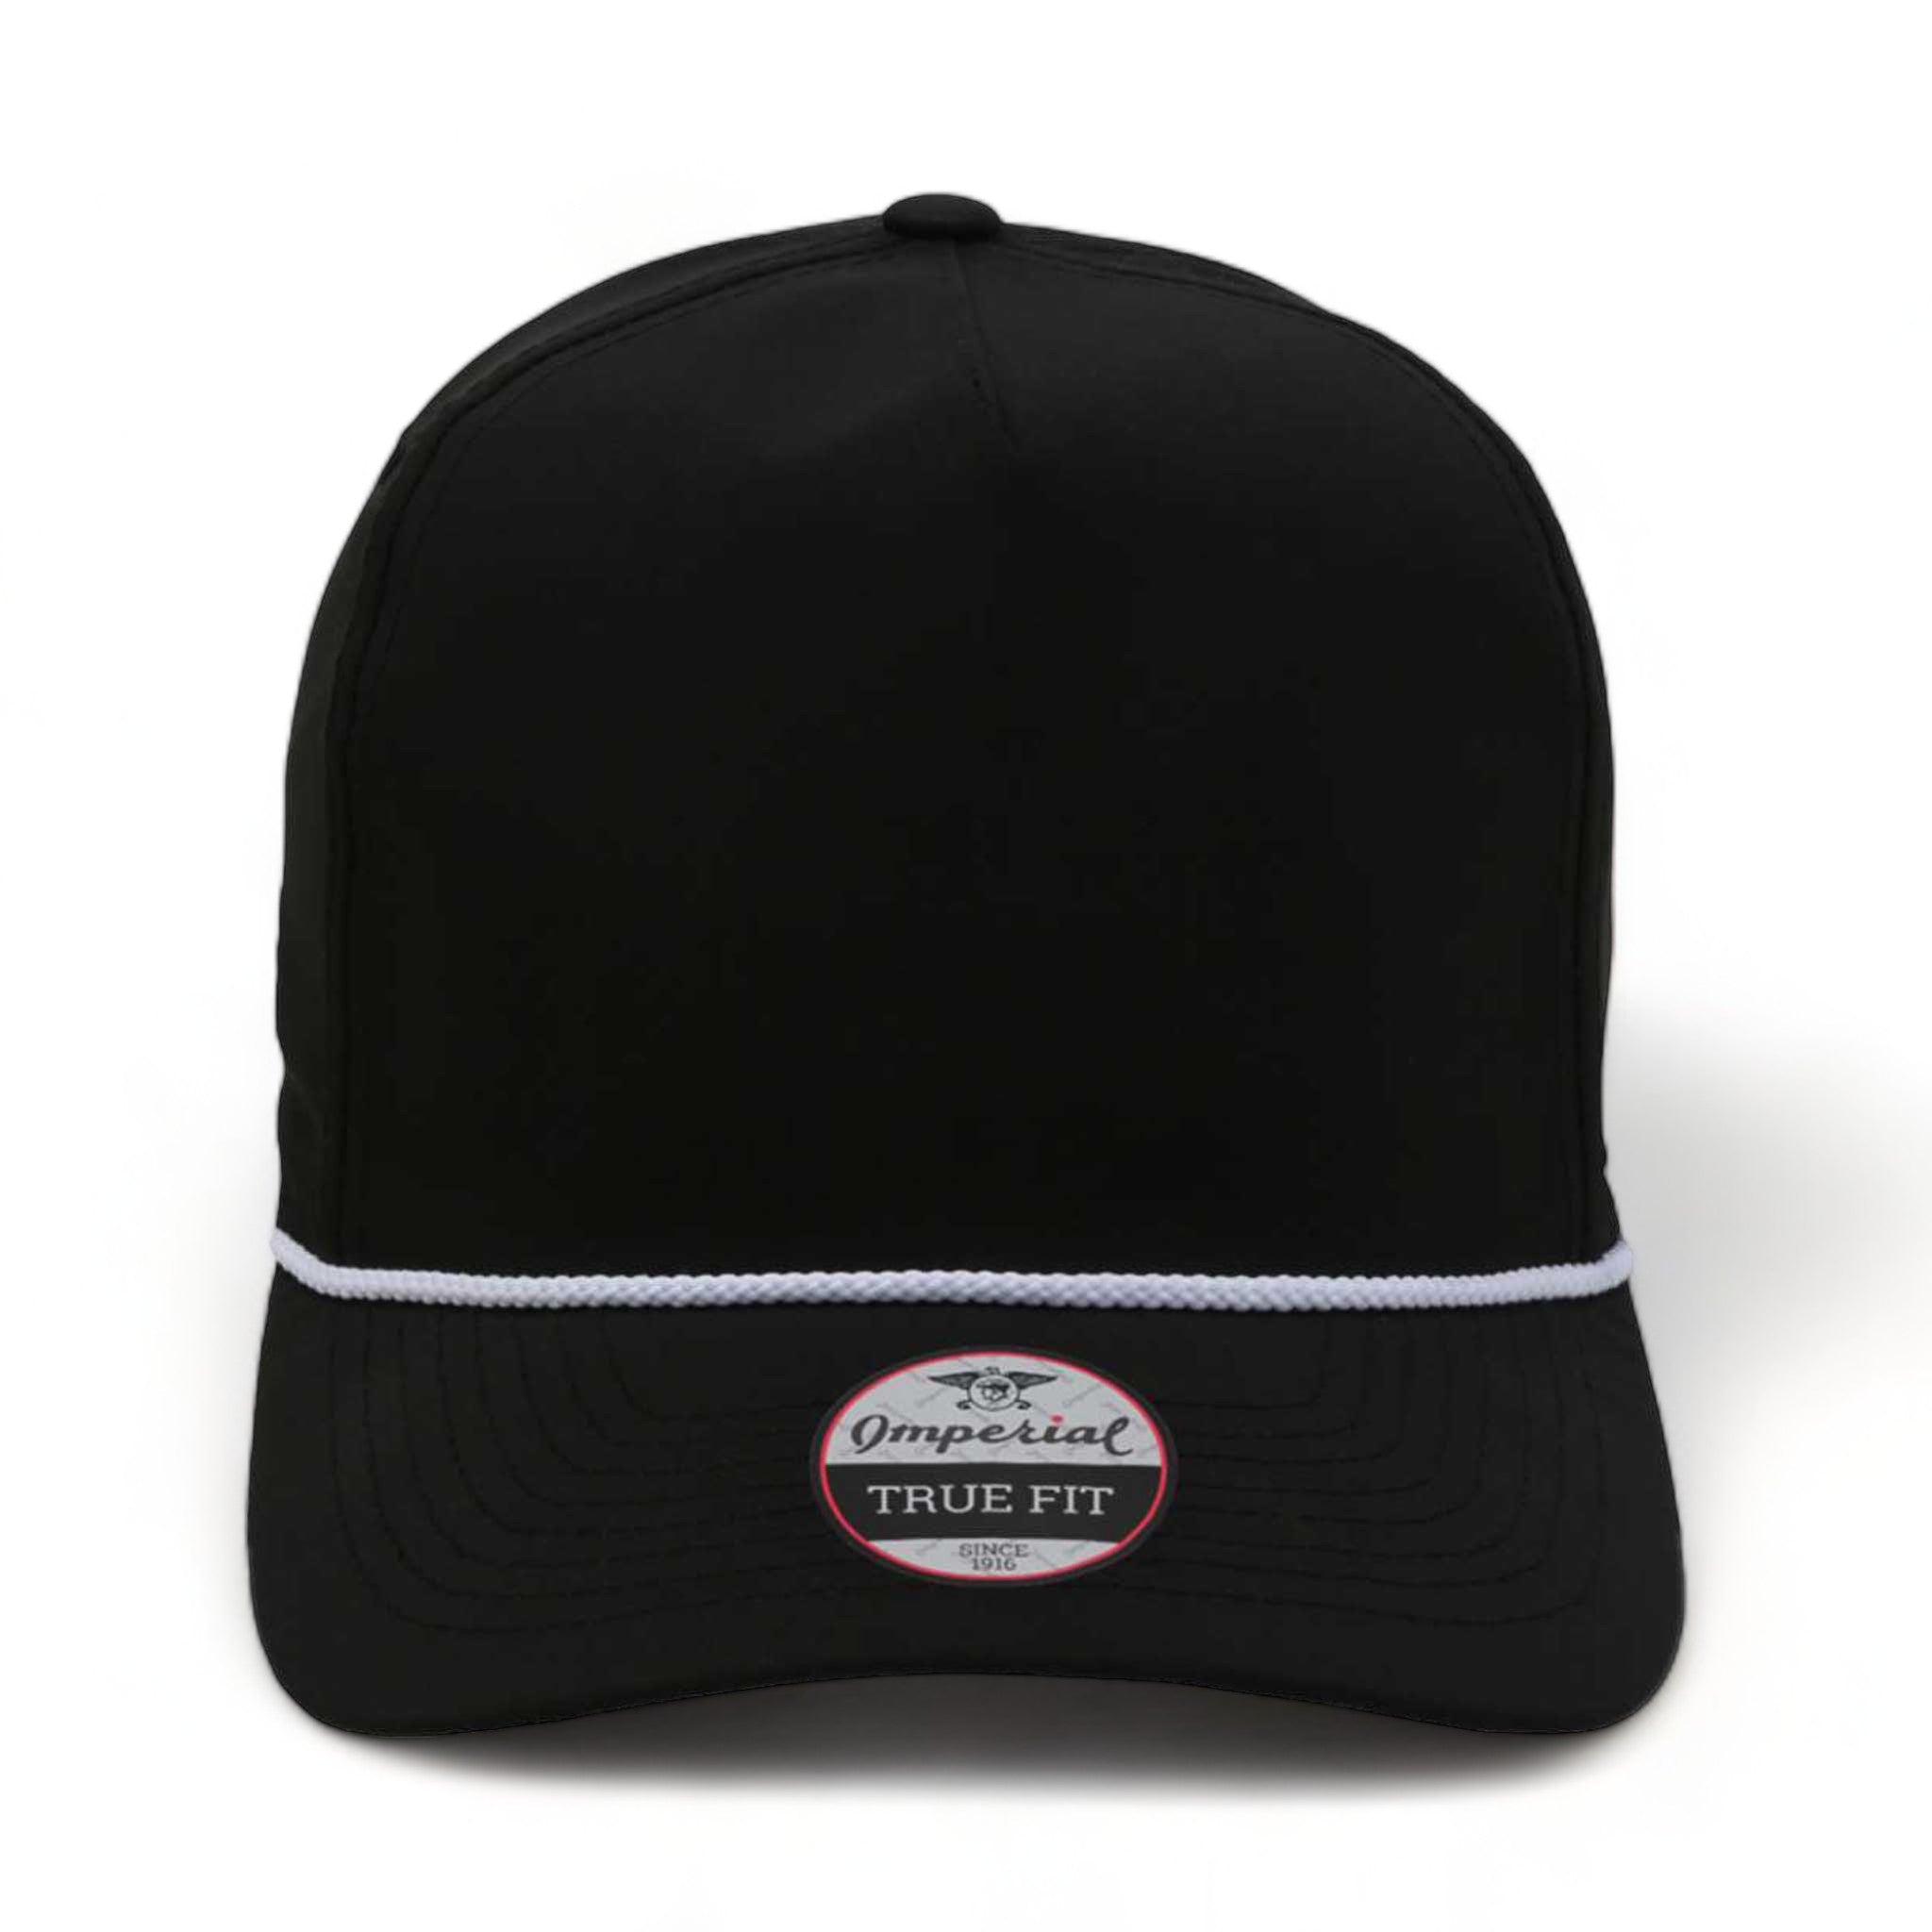 Front view of Imperial 5054 custom hat in black and white